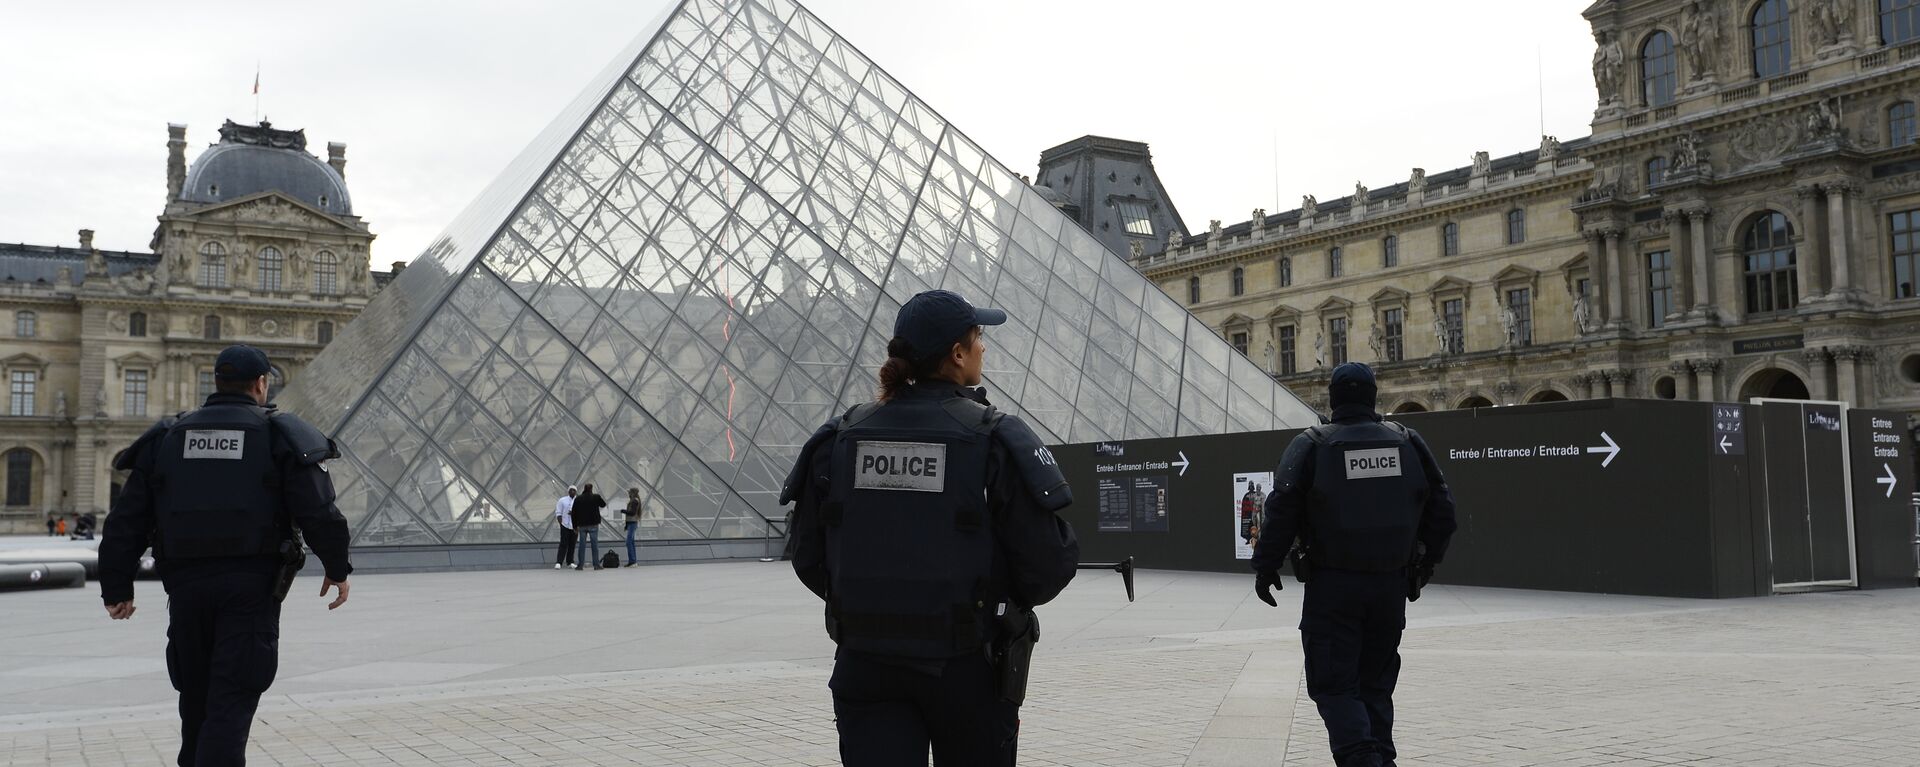 Police patrol in front of the Louvre Pyramid at the Louvre museum in Paris  - Sputnik International, 1920, 06.12.2022